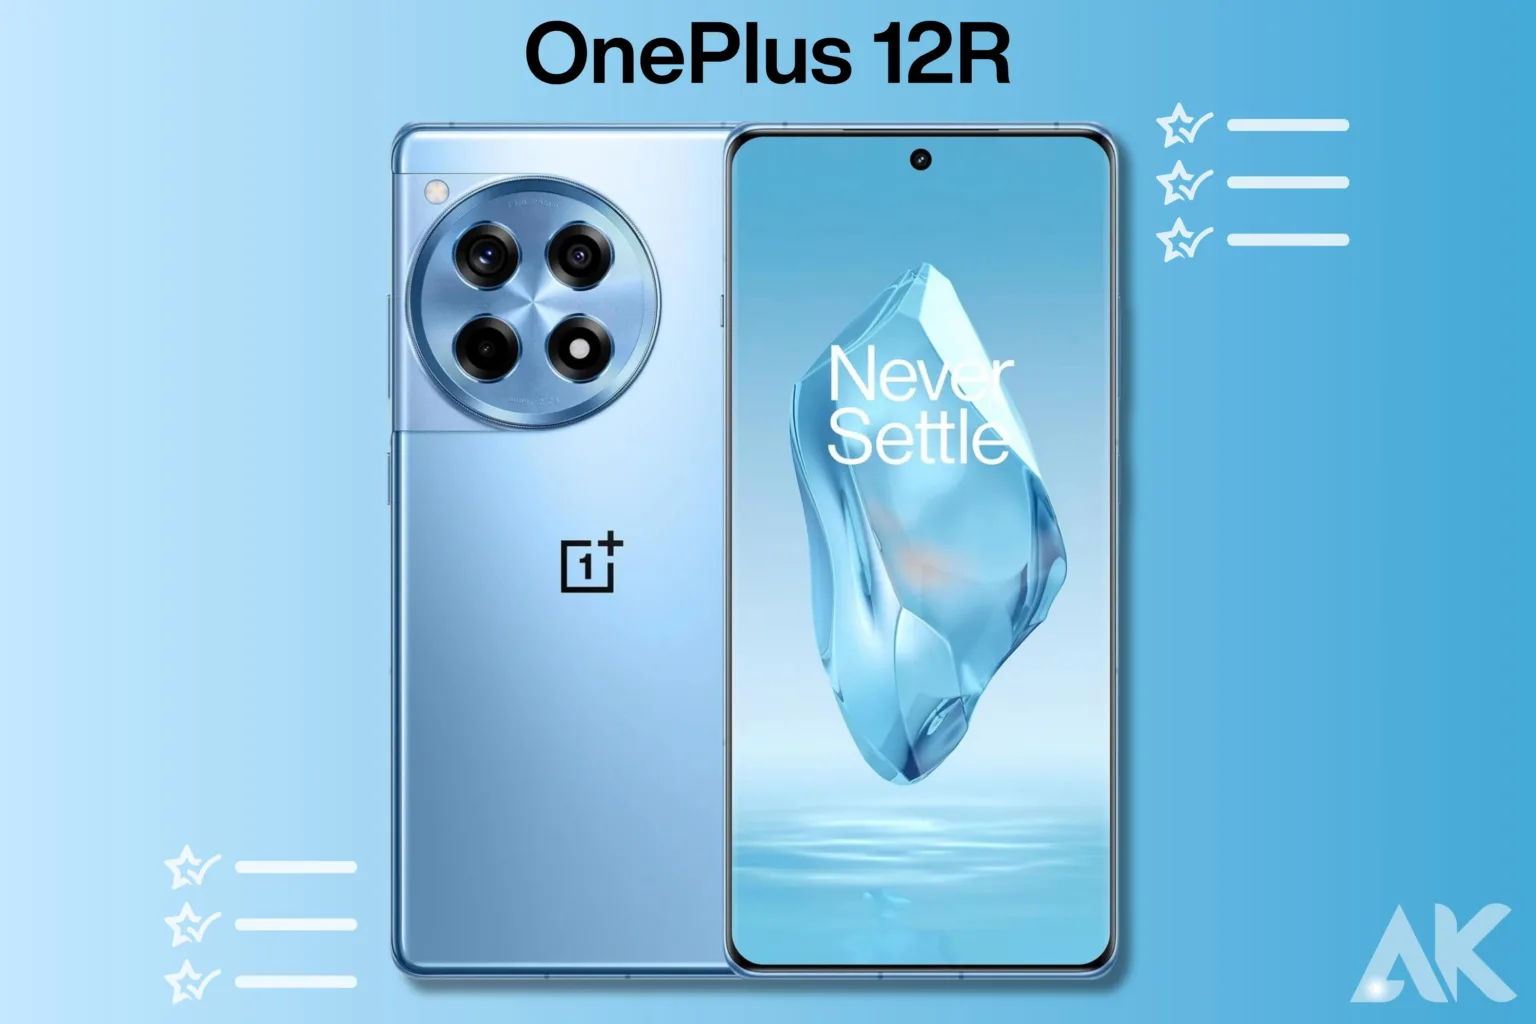 OnePlus 12R features